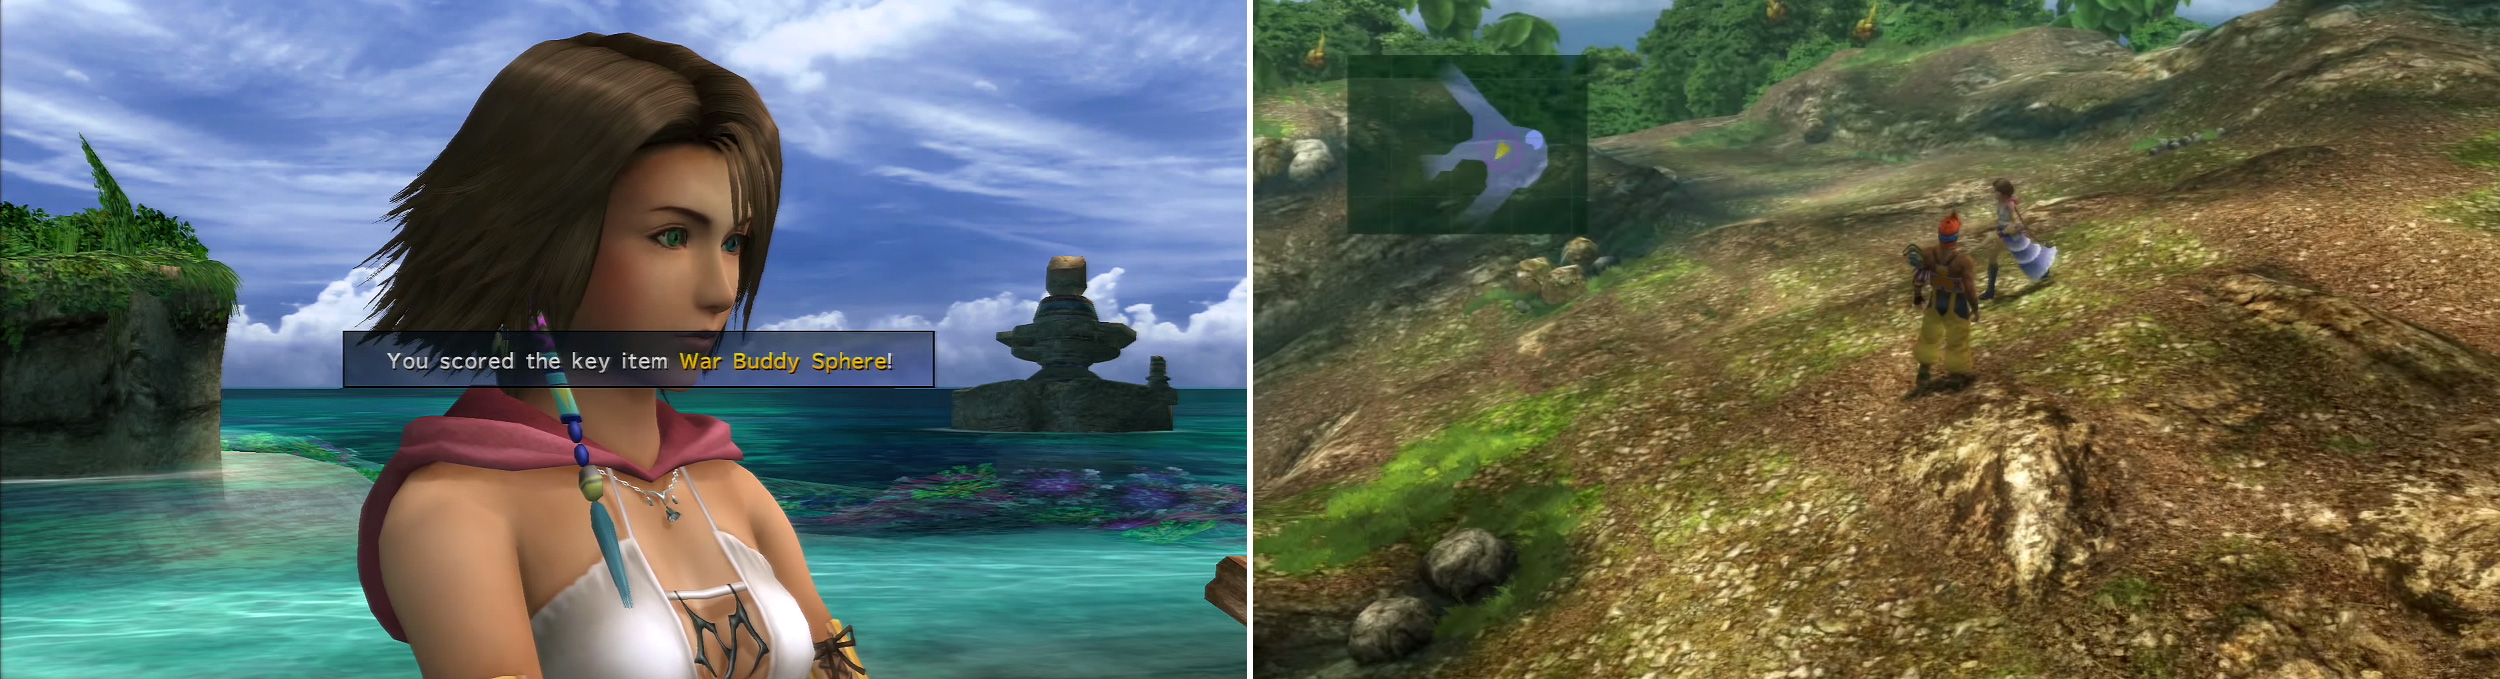 Speak to Beclem at the beach to receive the War Buddy Sphere (left) then return to Wakka (right) at the village entrance to complete this part.